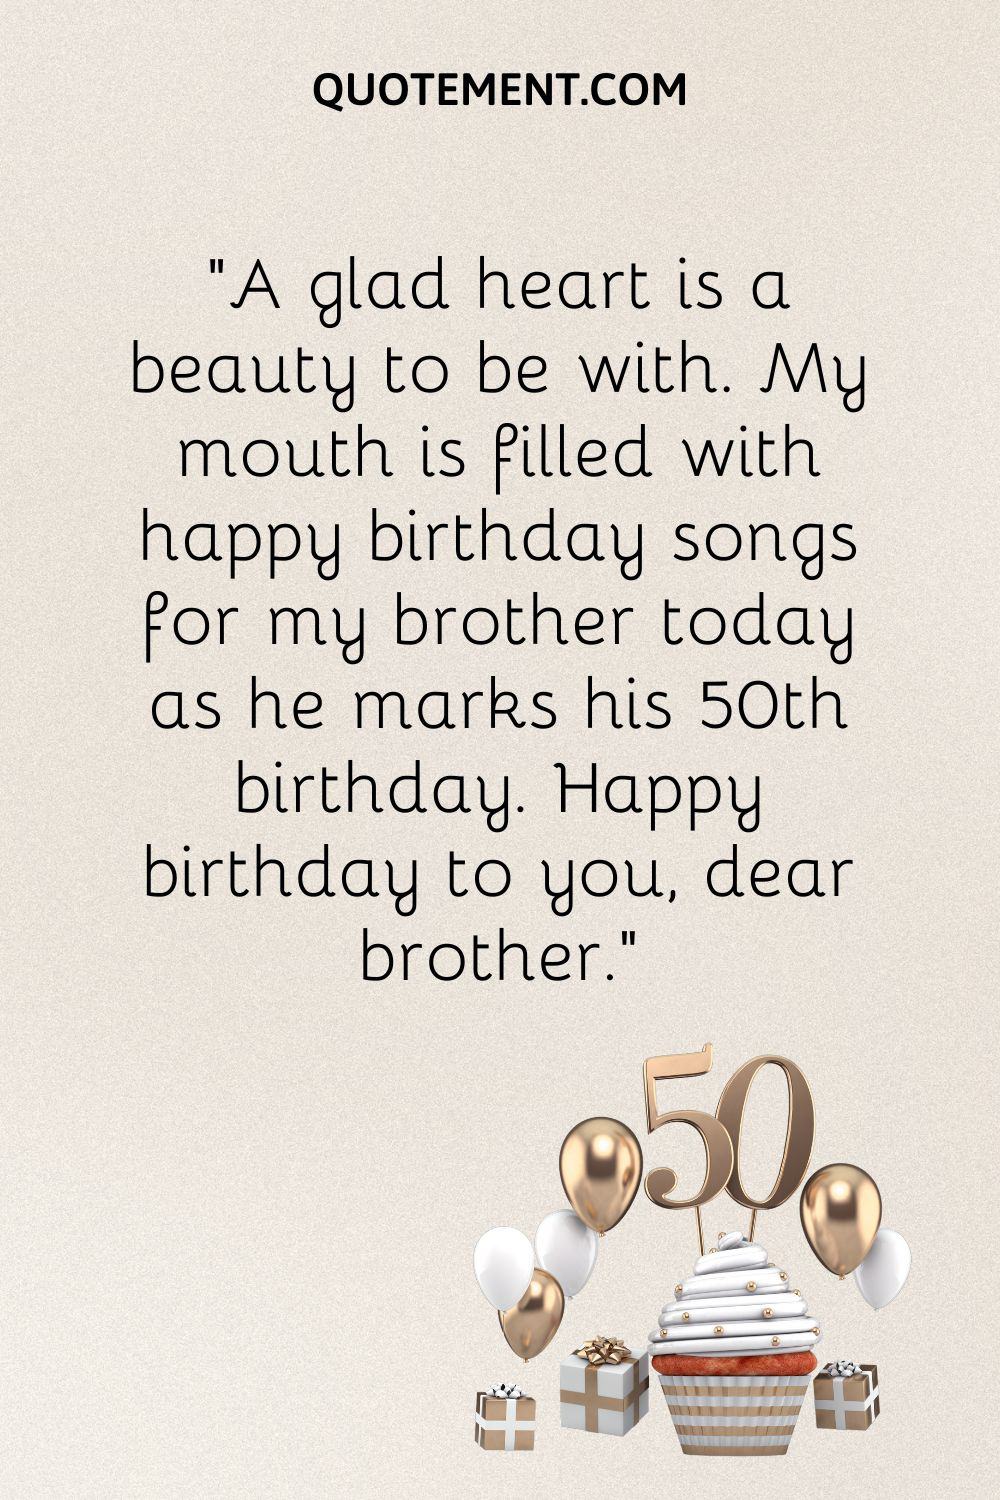 “A glad heart is a beauty to be with. My mouth is filled with happy birthday songs for my brother today as he marks his 50th birthday. Happy birthday to you, dear brother.”